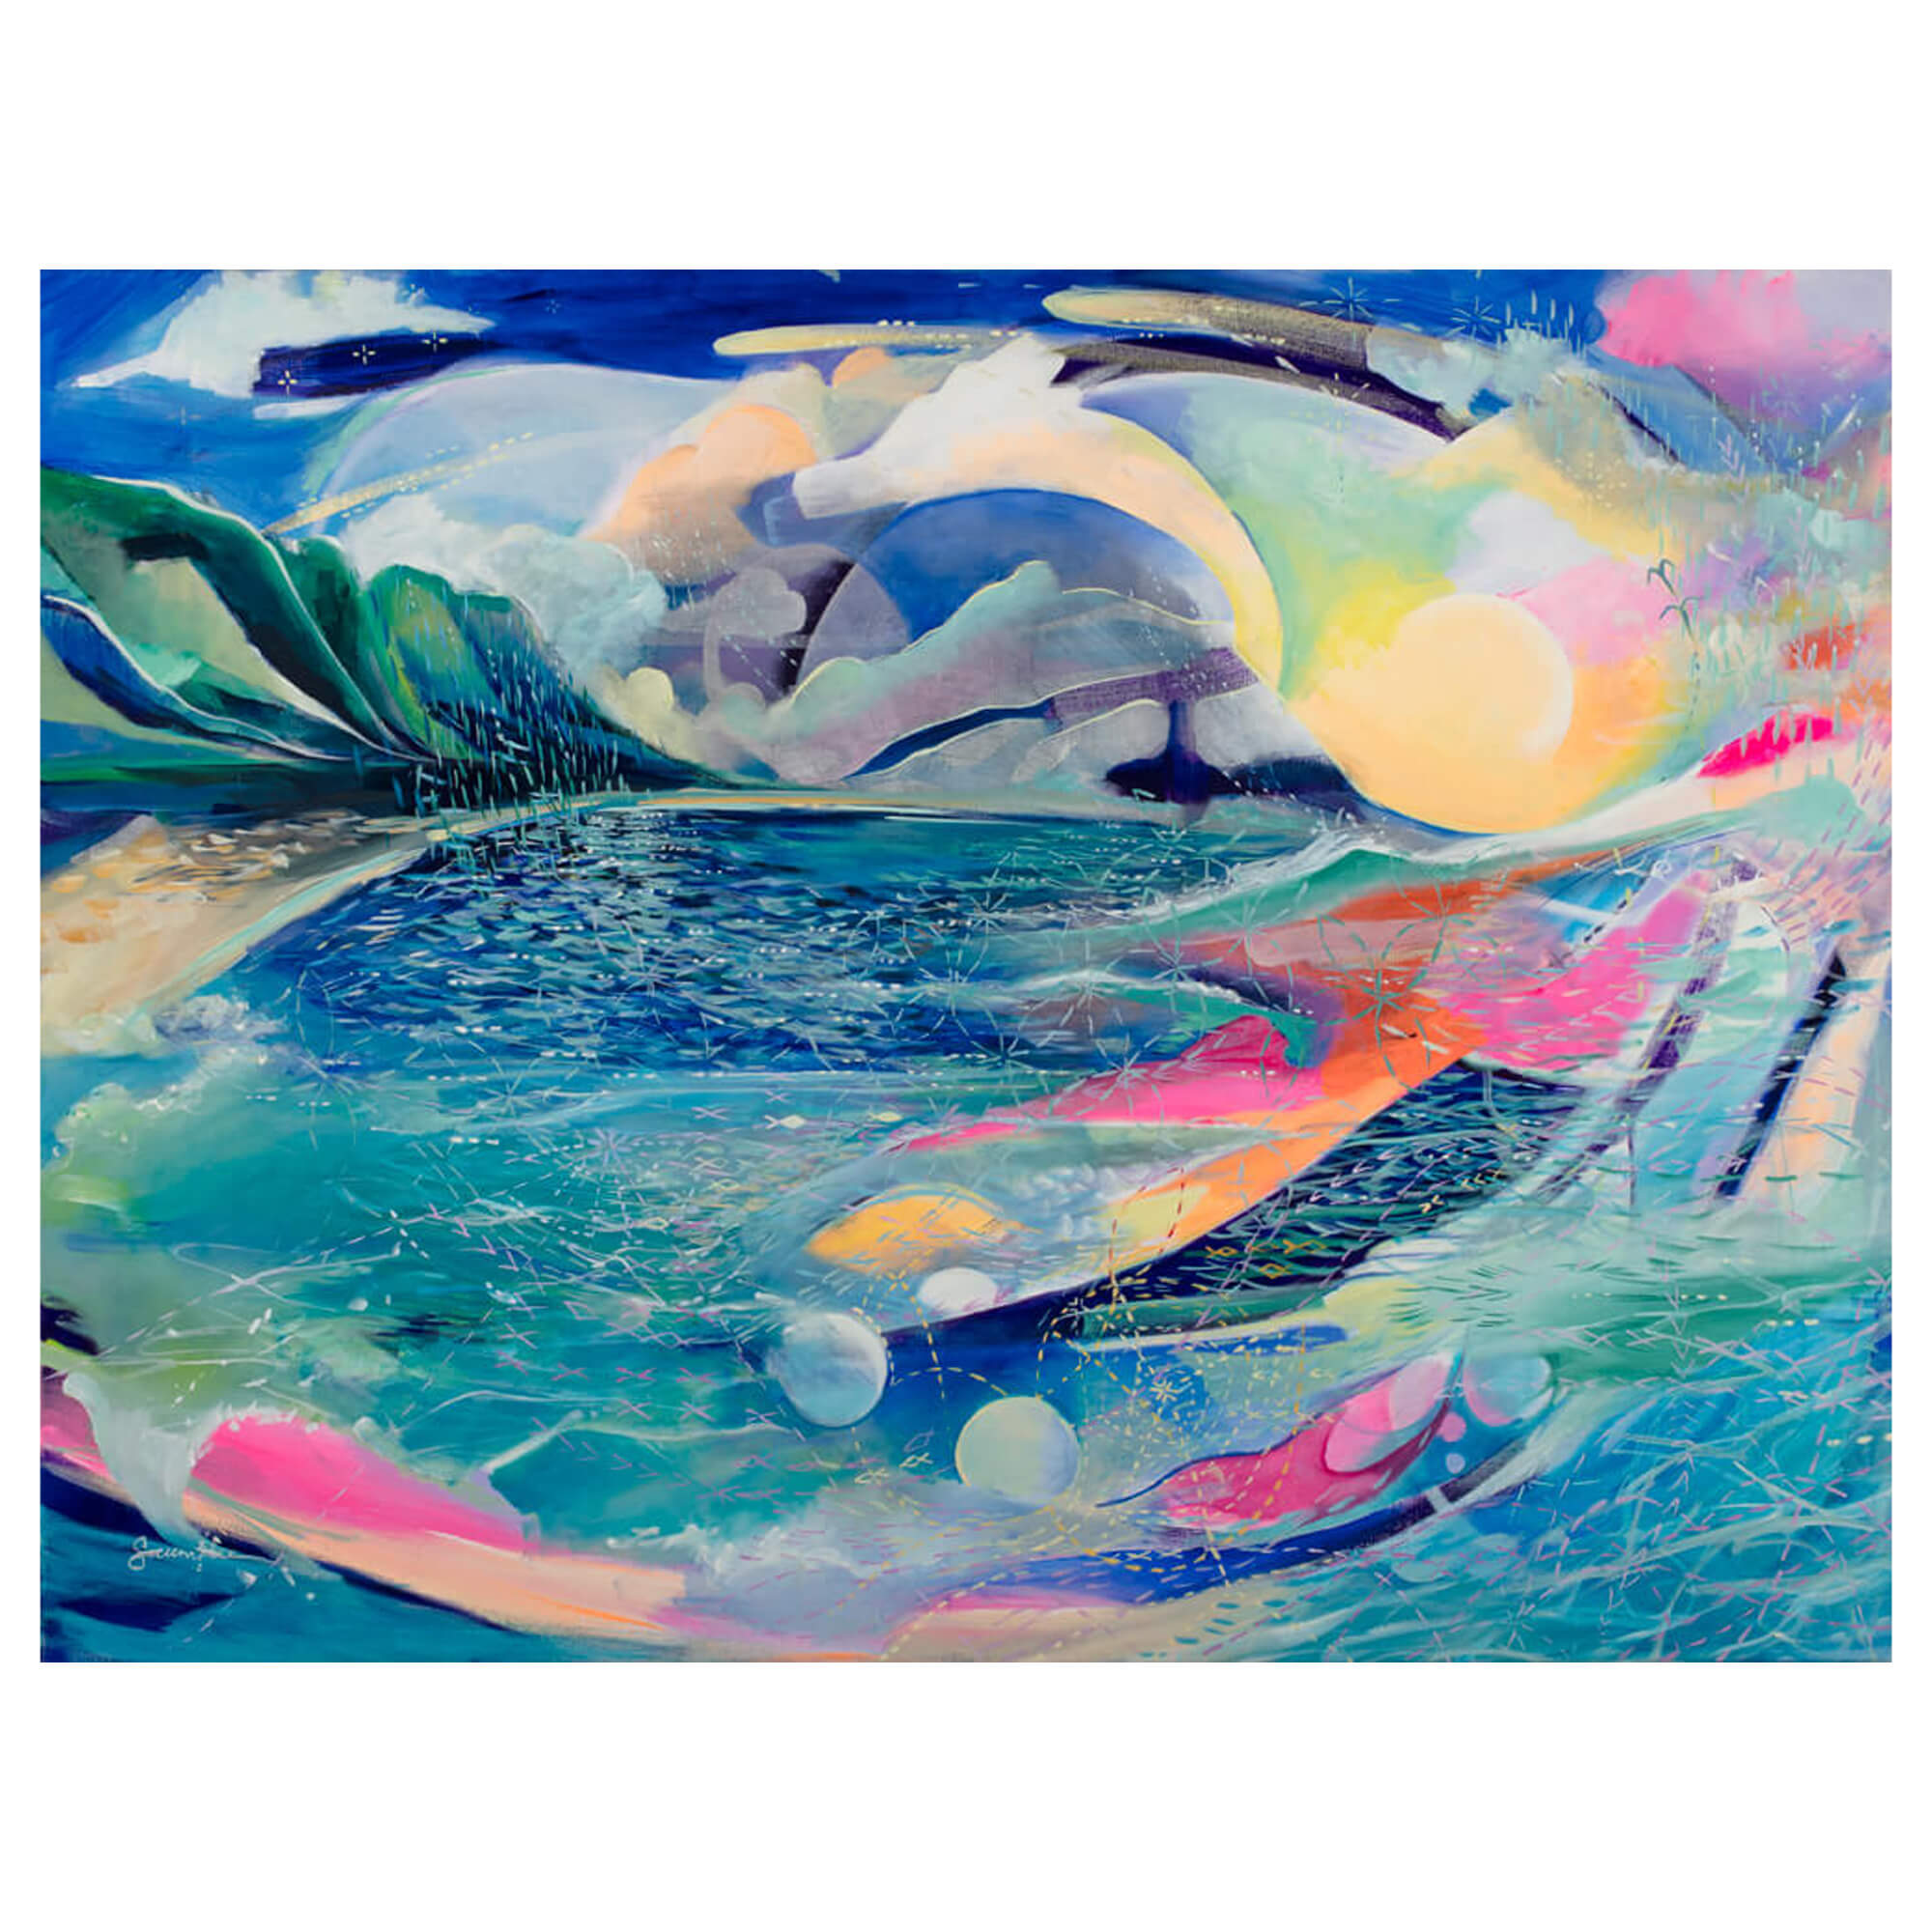 A metal art print of an abstract artwork of a seascape with vibrant pastel colors Hawaii artist Saumolia  Puapuaga 